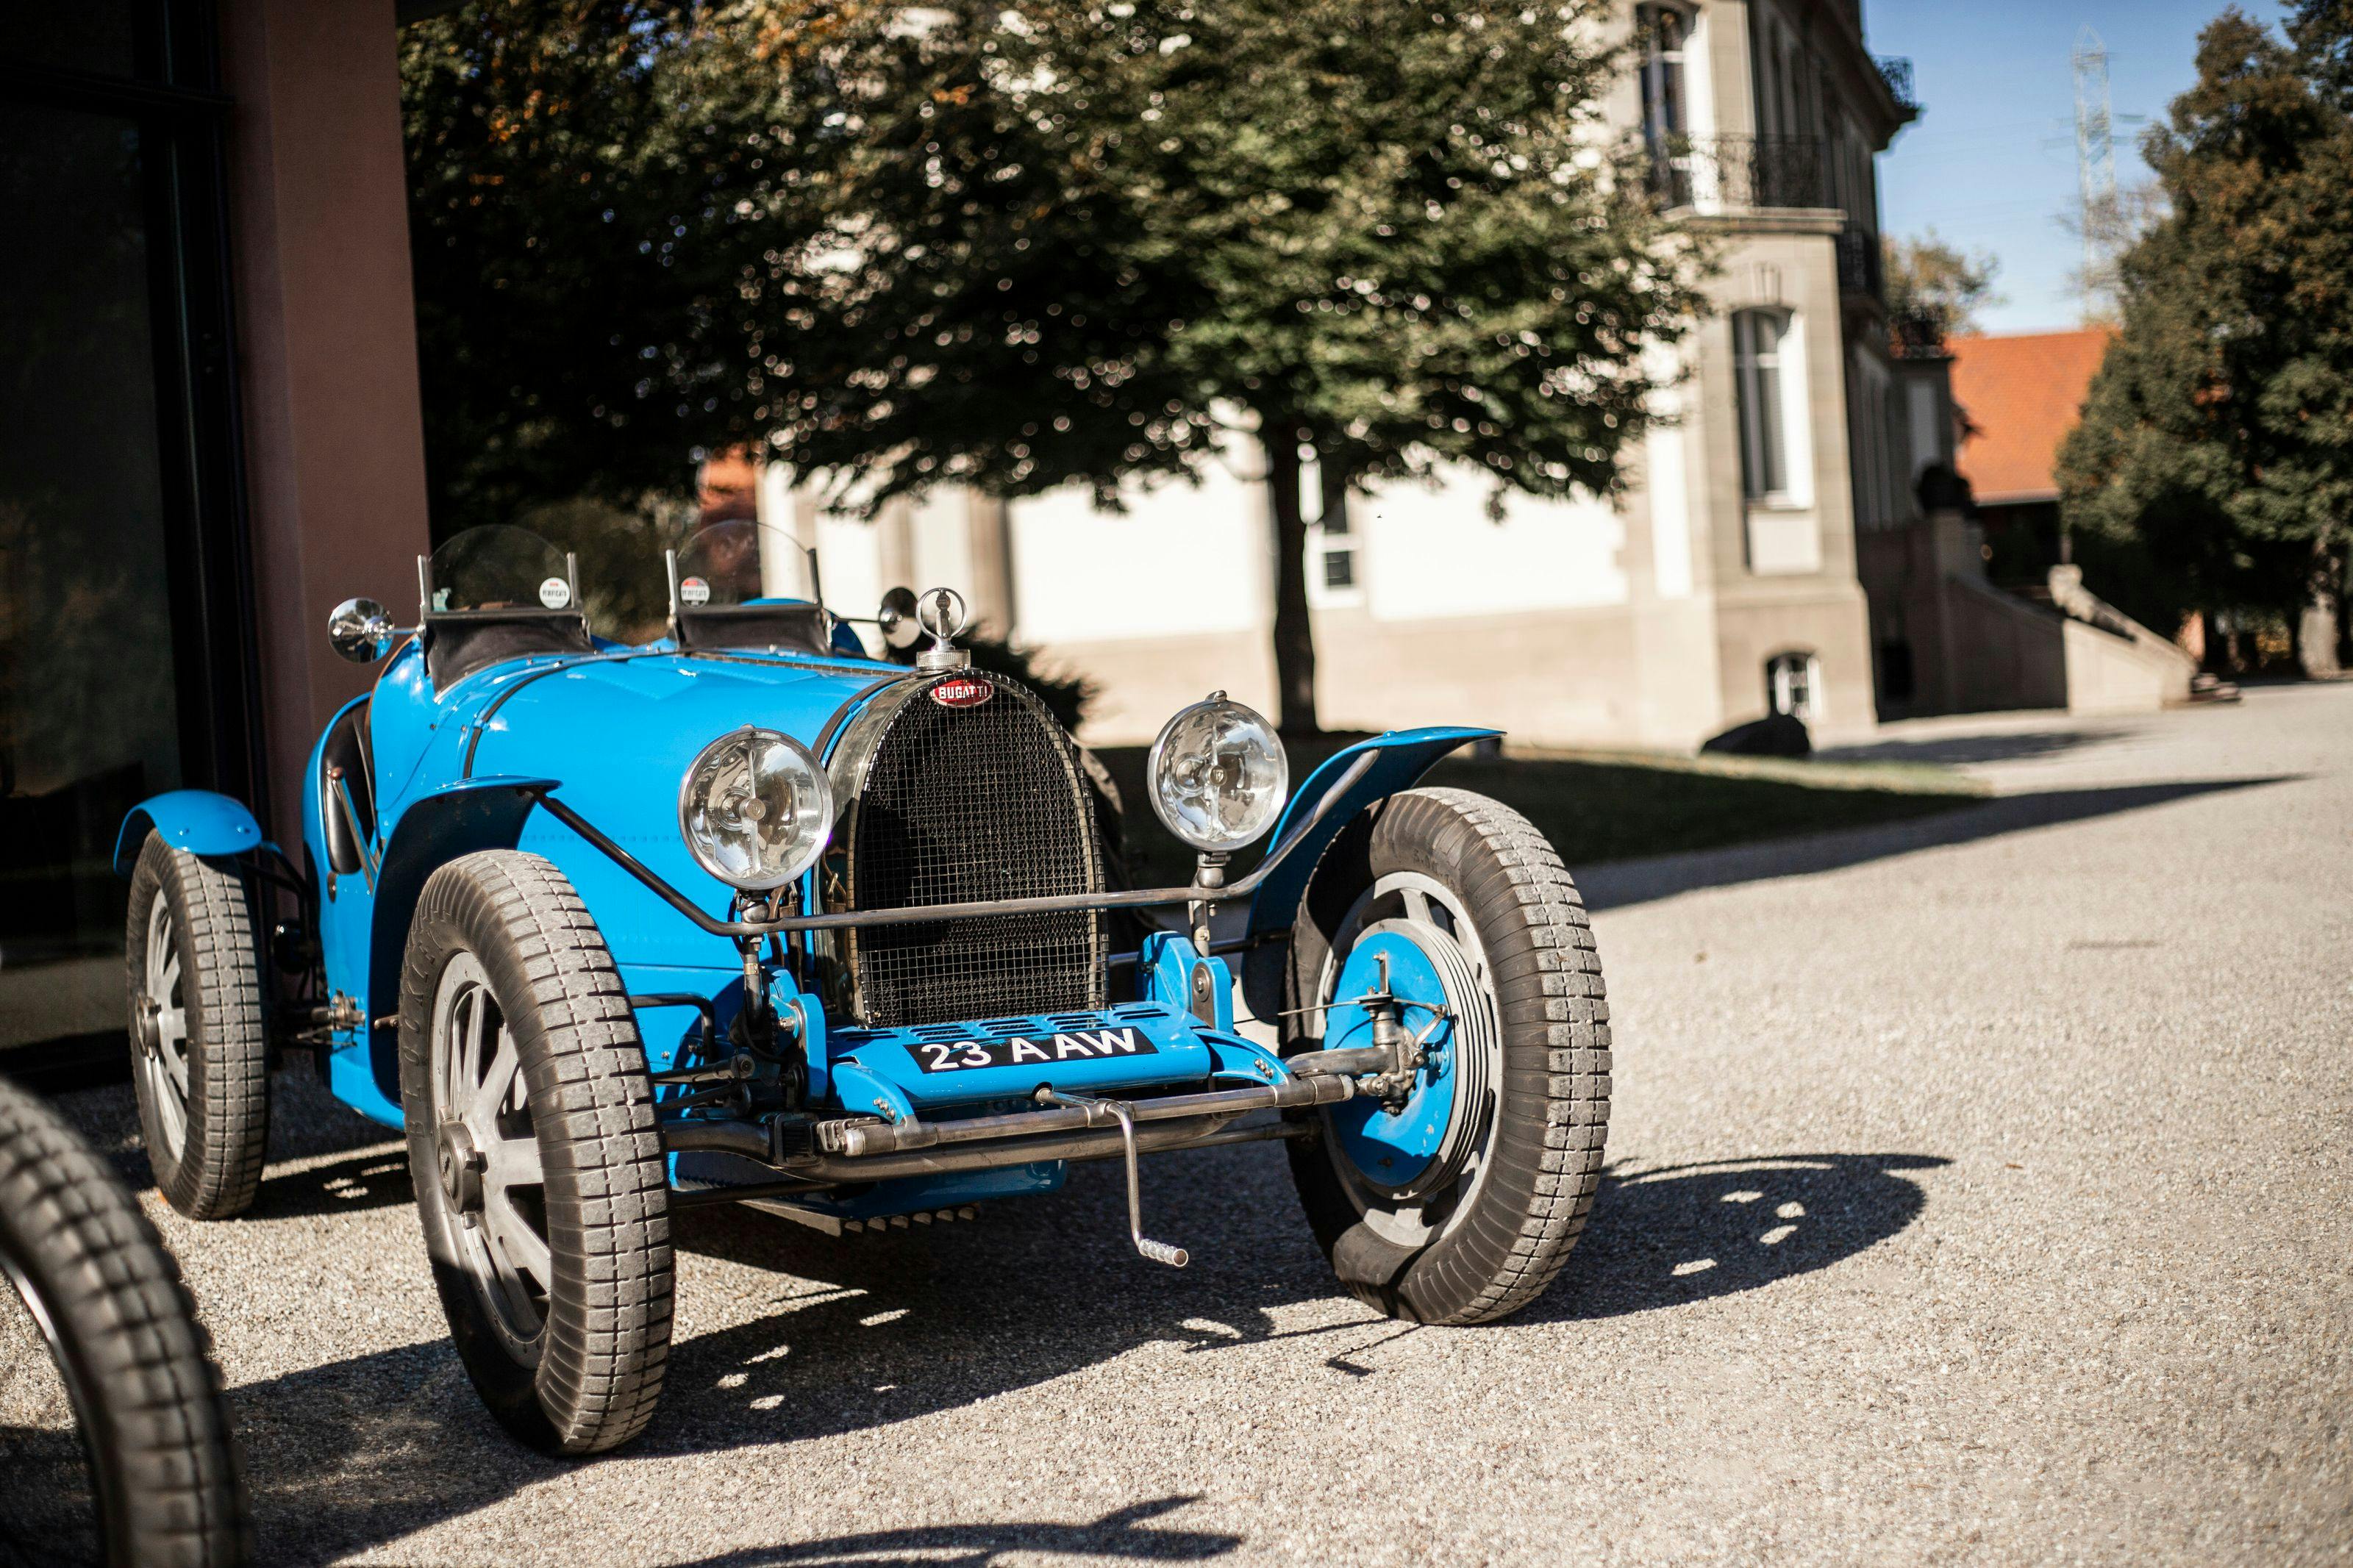 The legendary Bugatti Type 35 – The world’s most successful racing car